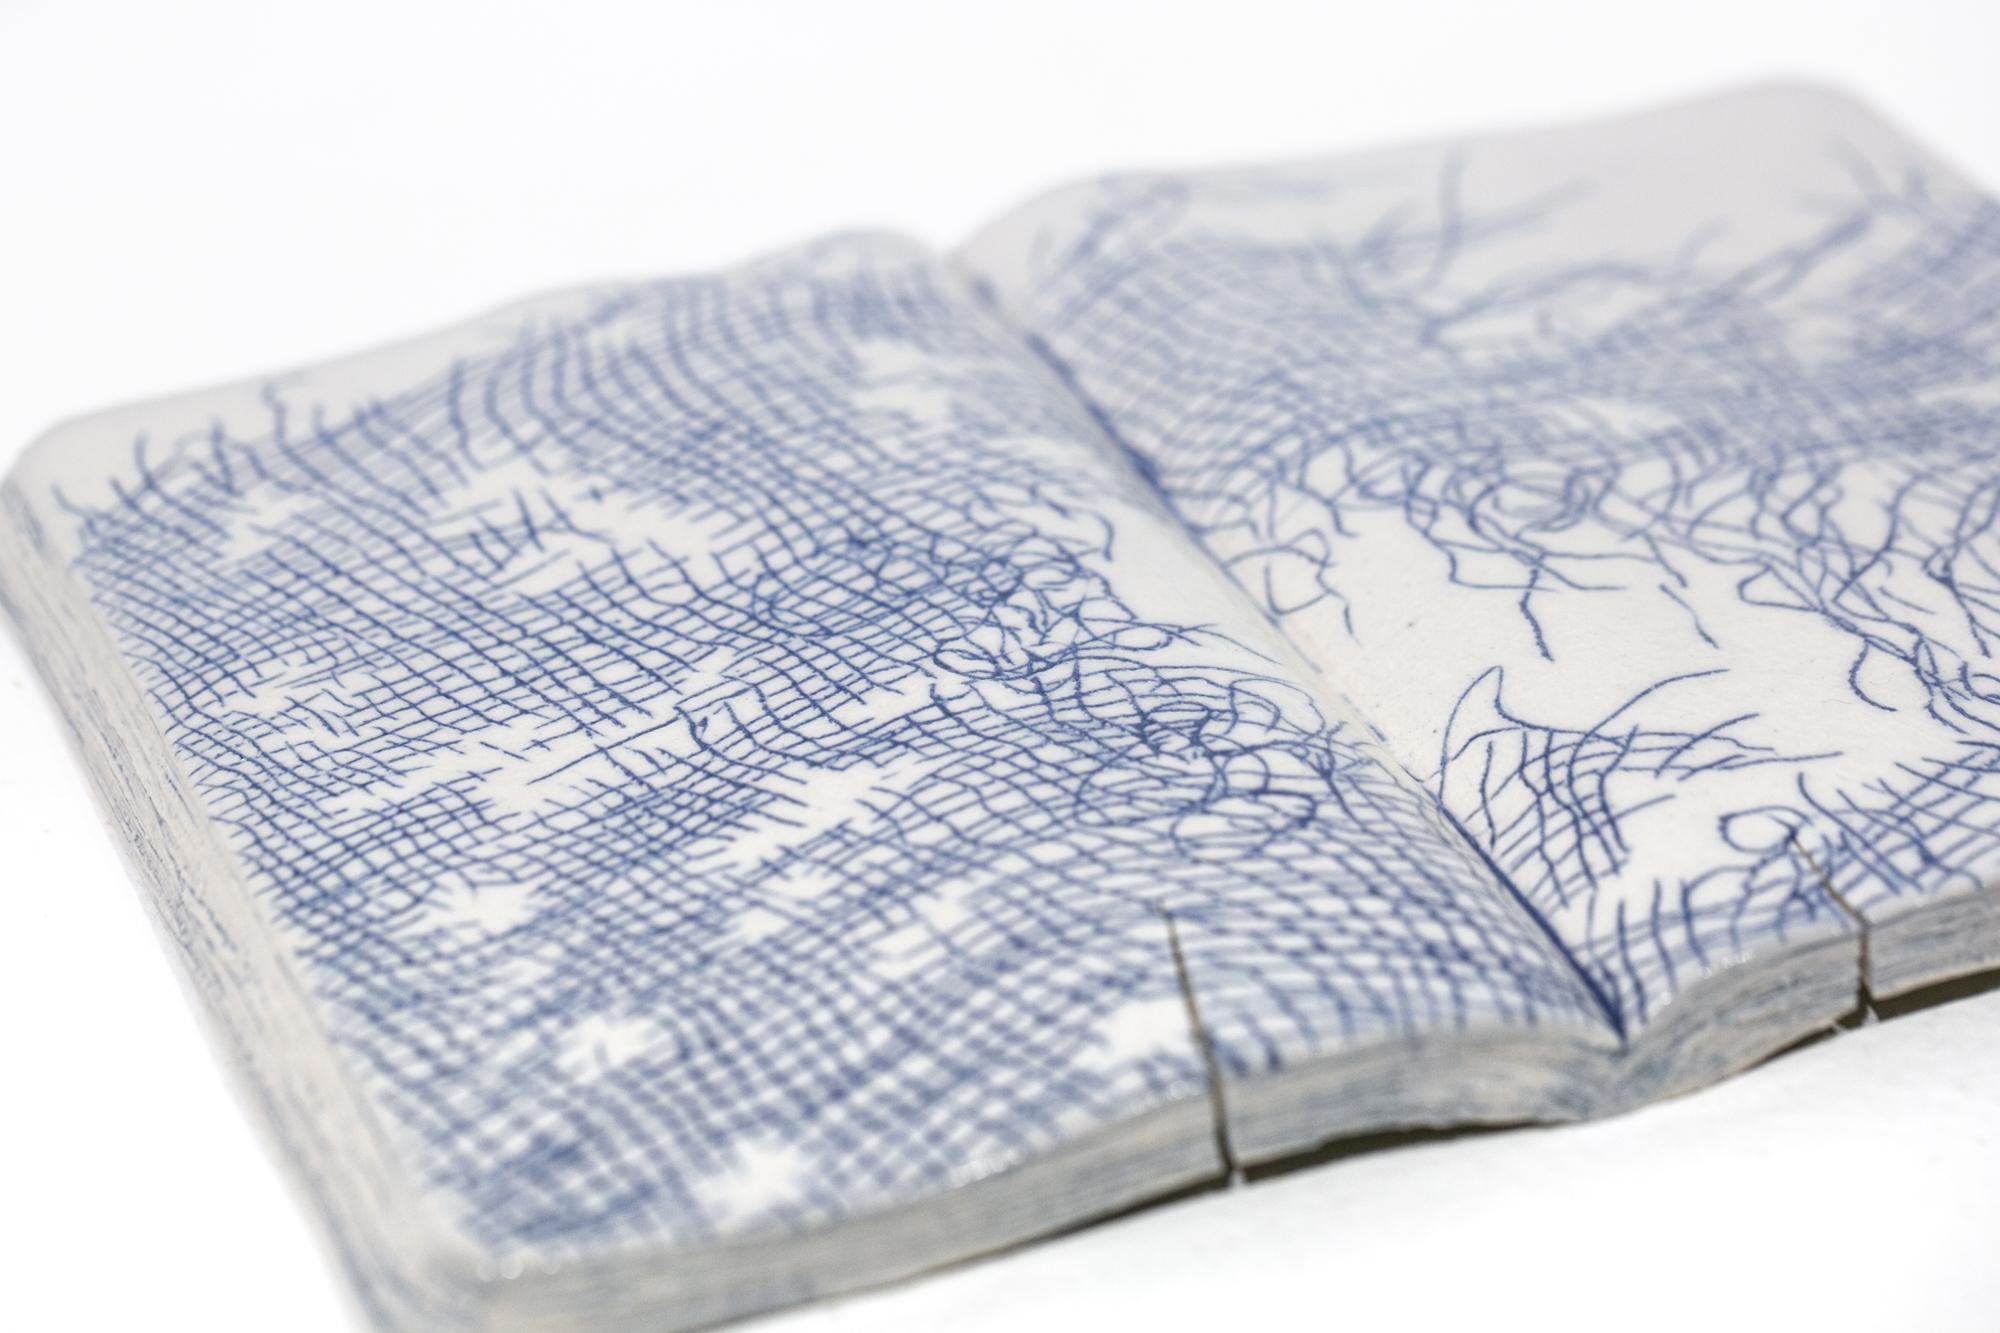 Sketchbook (small #10) - Contemporary Sculpture by Yoonmi Nam